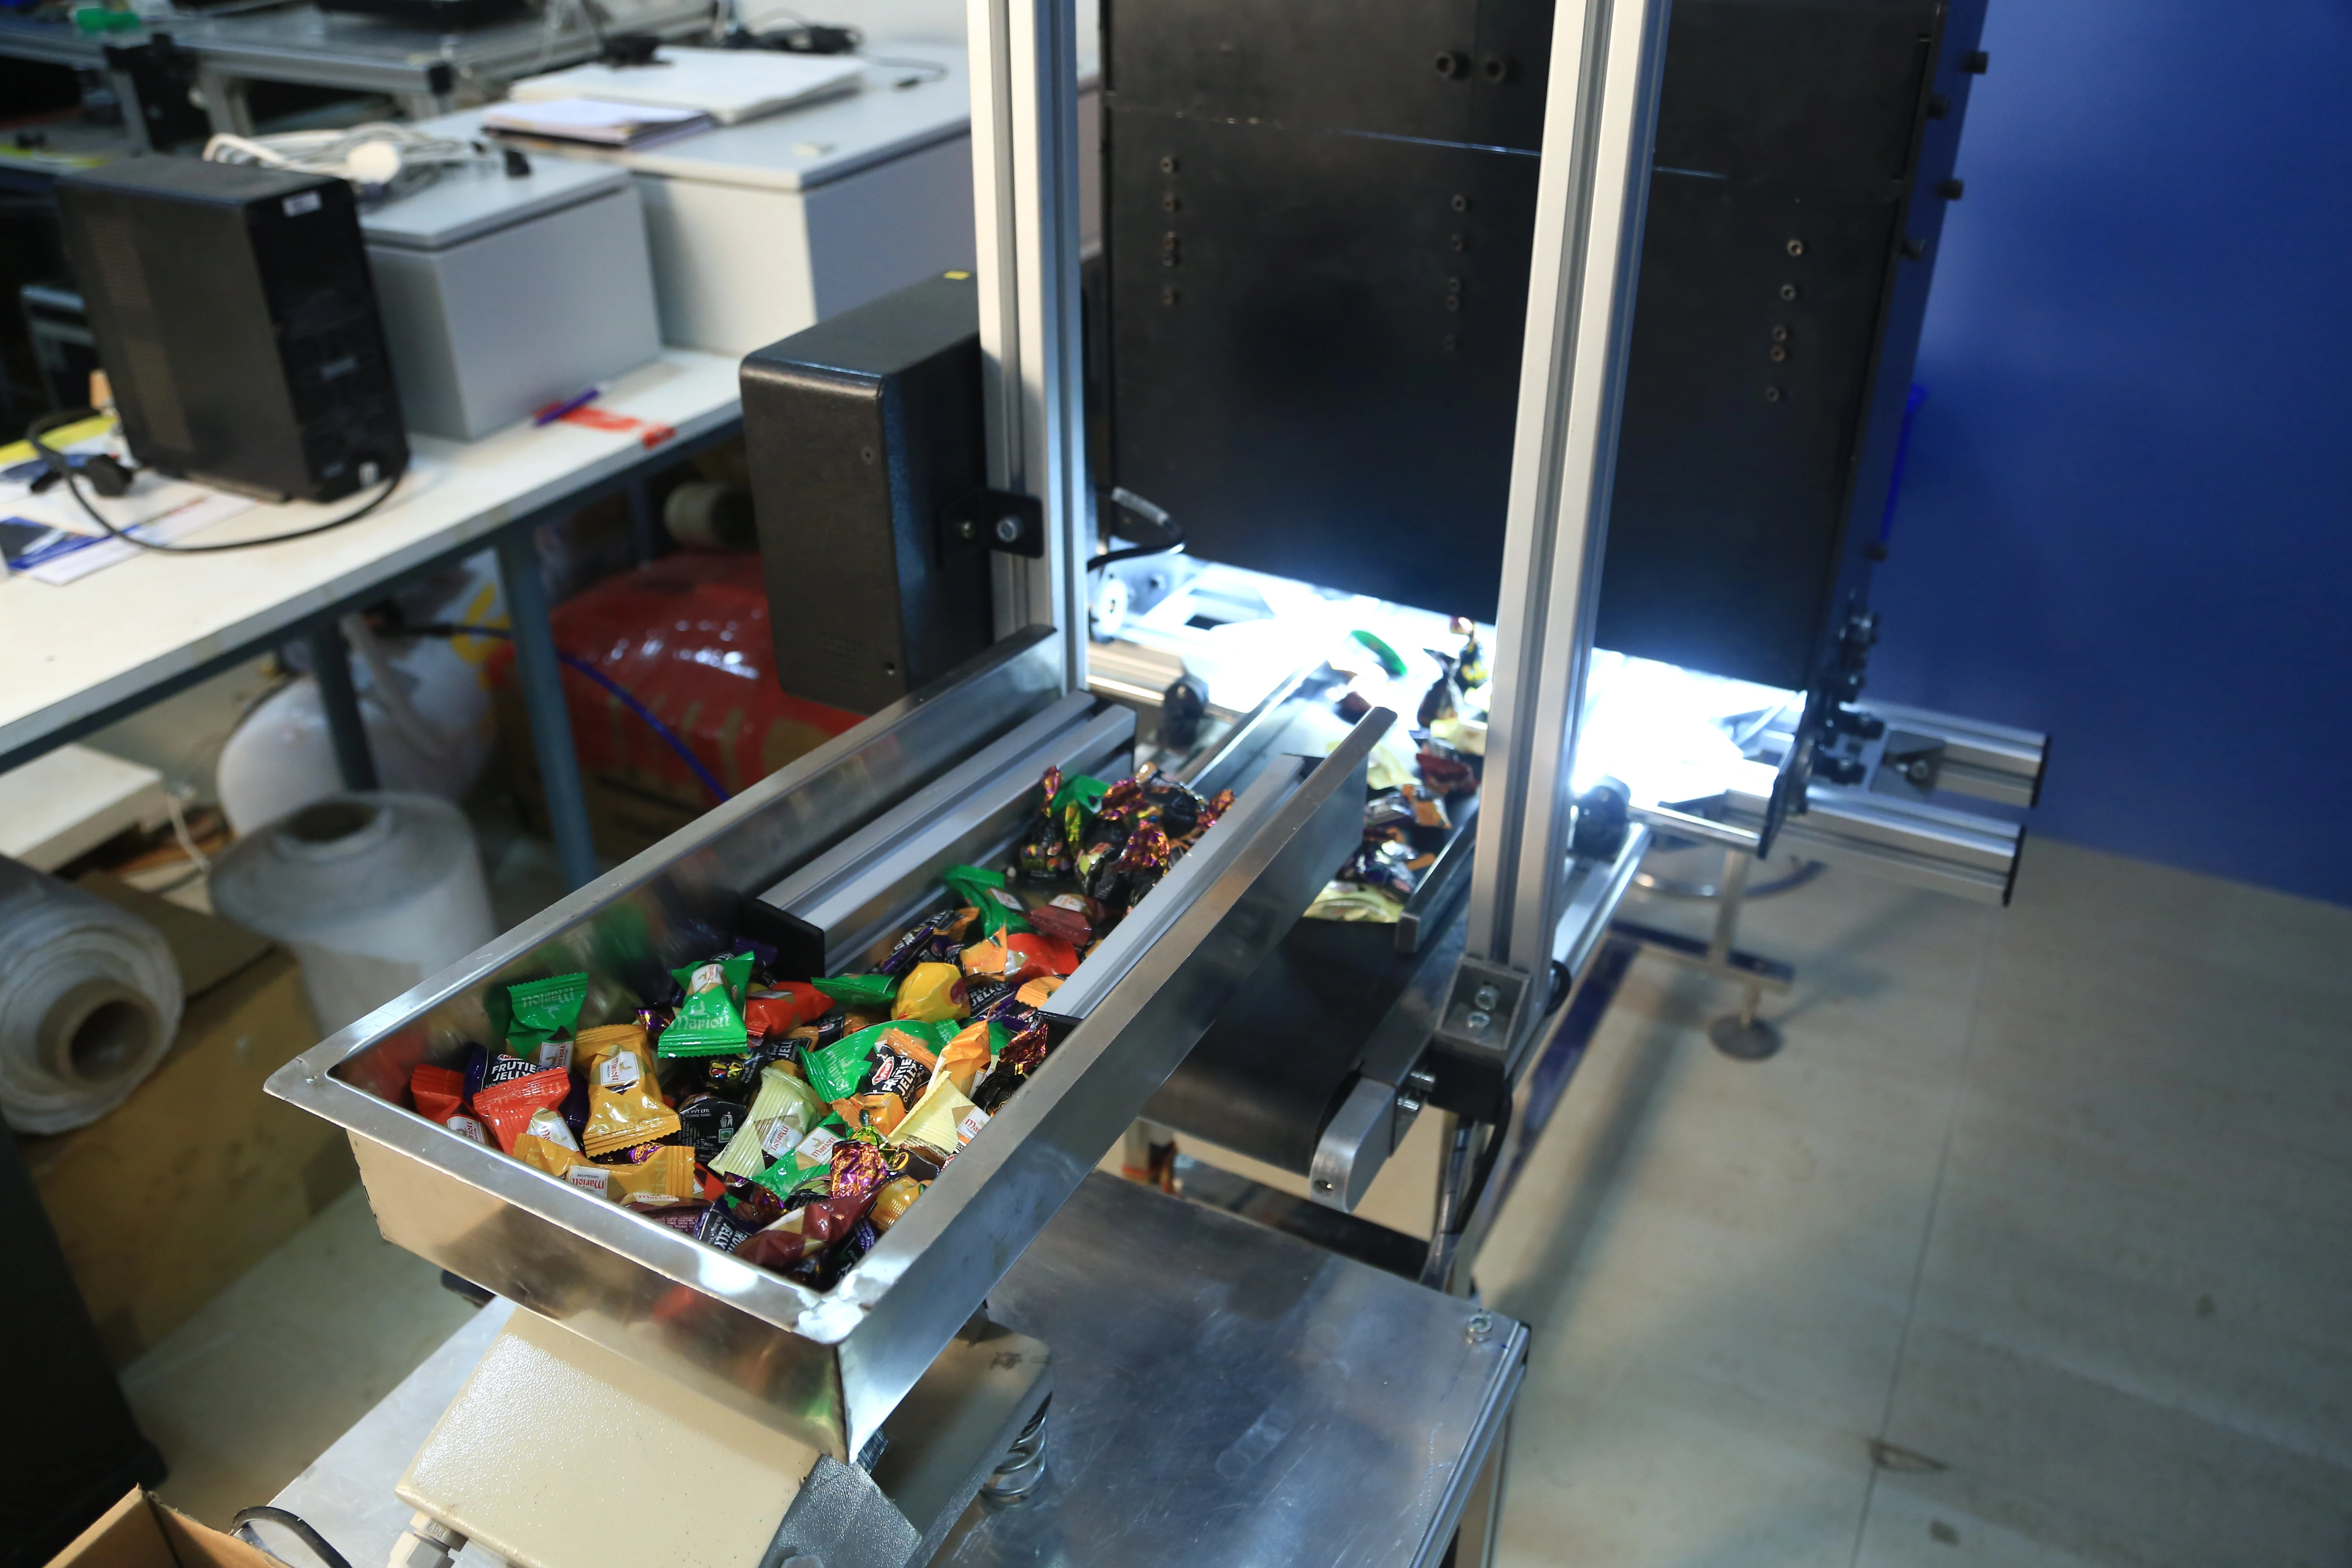 Kiara Sorting and Inspecting packaged drinks for absence and presence of expiry date on the tetrapack with the use of Machine Learning and artificial intelligence